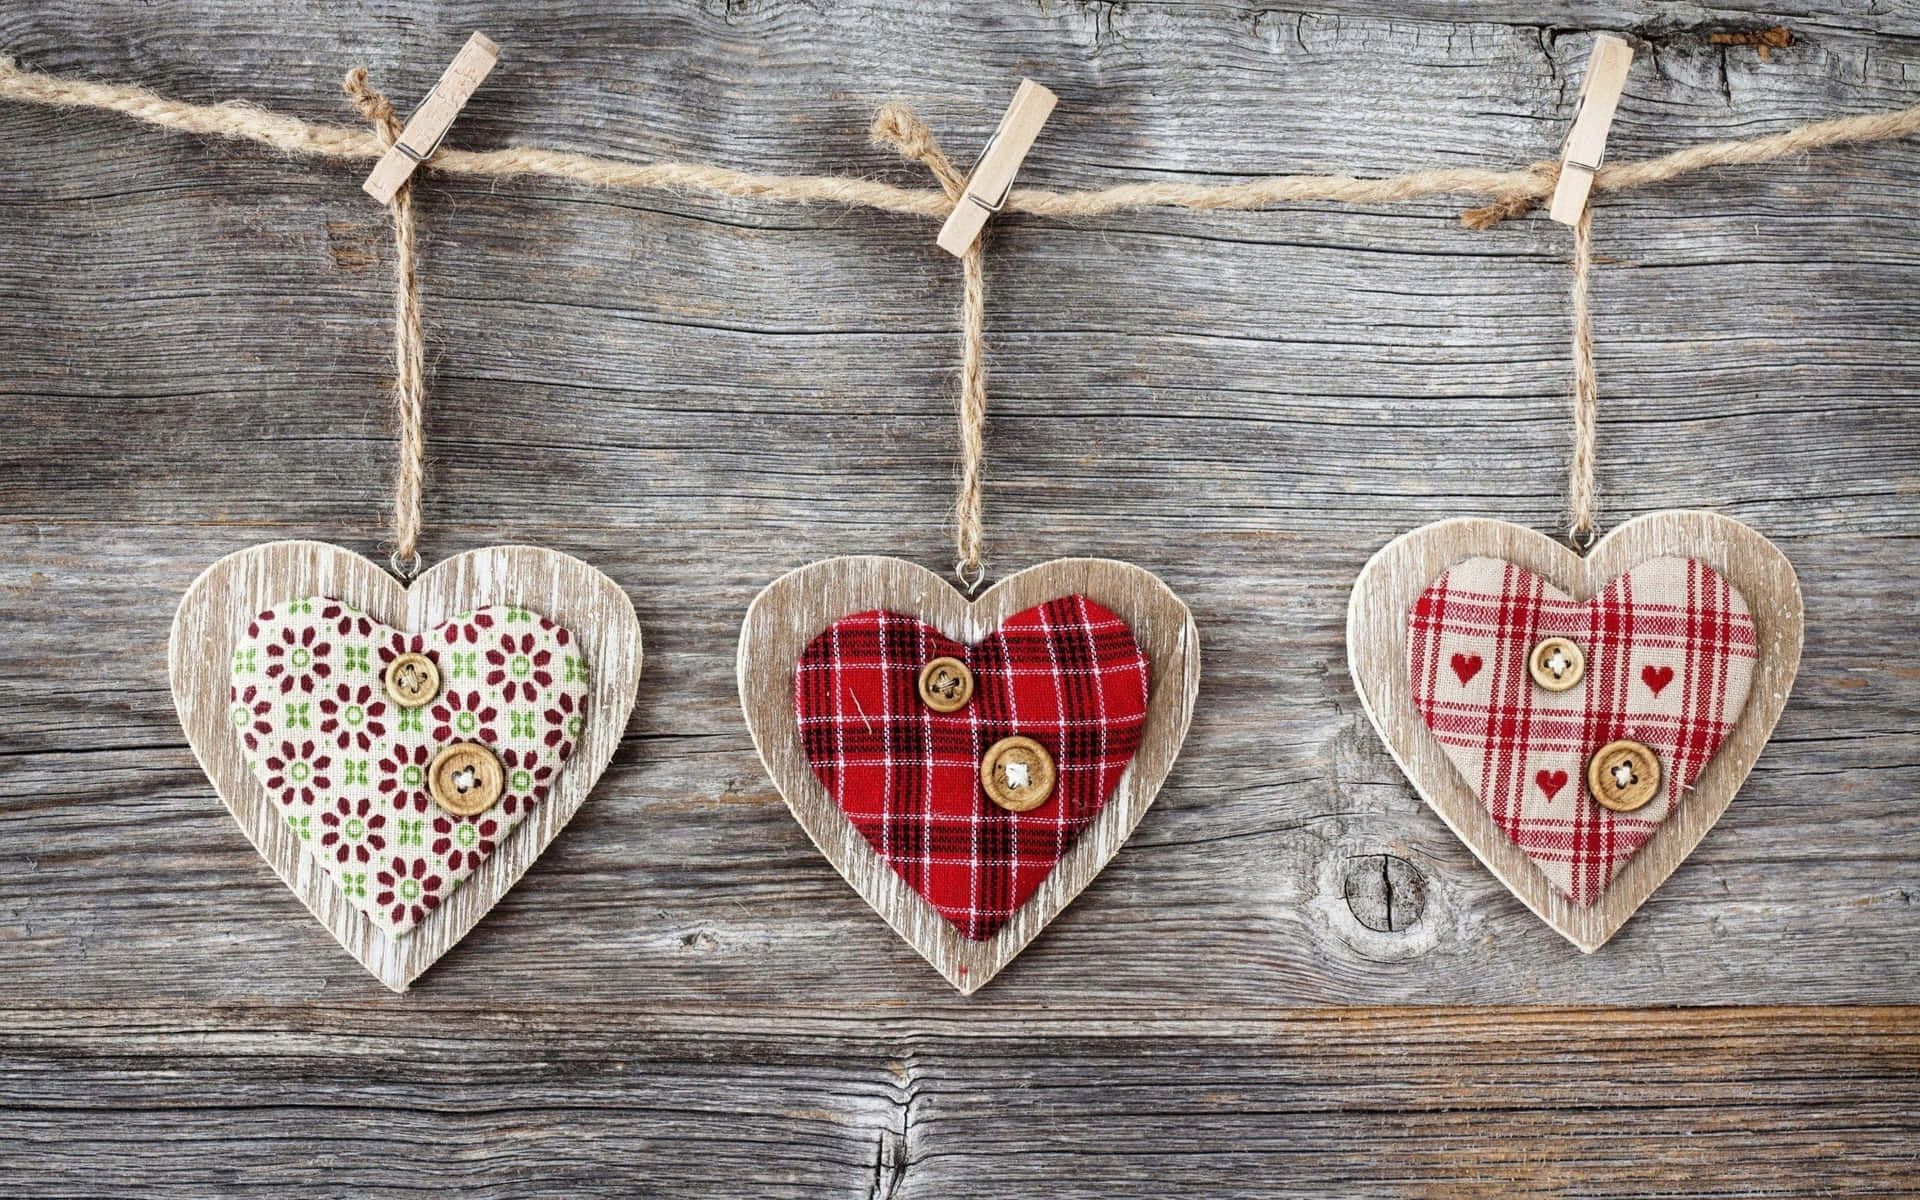 Bring the rustic charm of the countryside to your Valentine’s Day celebration! Wallpaper